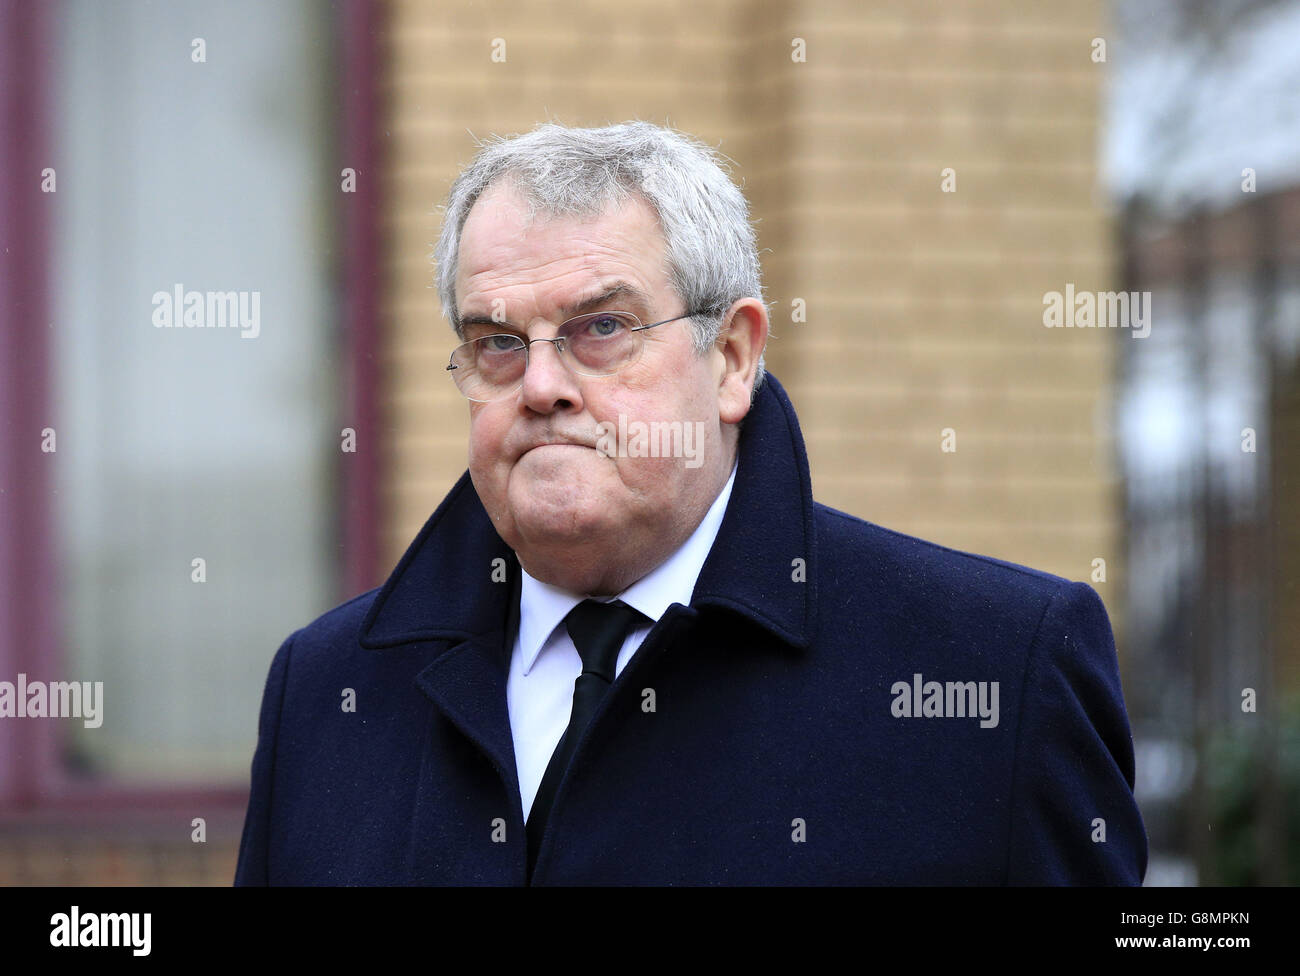 Des James, father of Private Cheryl James, arrives at Woking Coroner's Court in Surrey for the long-awaited fresh inquest which is due to begin into the death of the young soldier at the controversial Deepcut Army barracks more than 20 years ago. Stock Photo